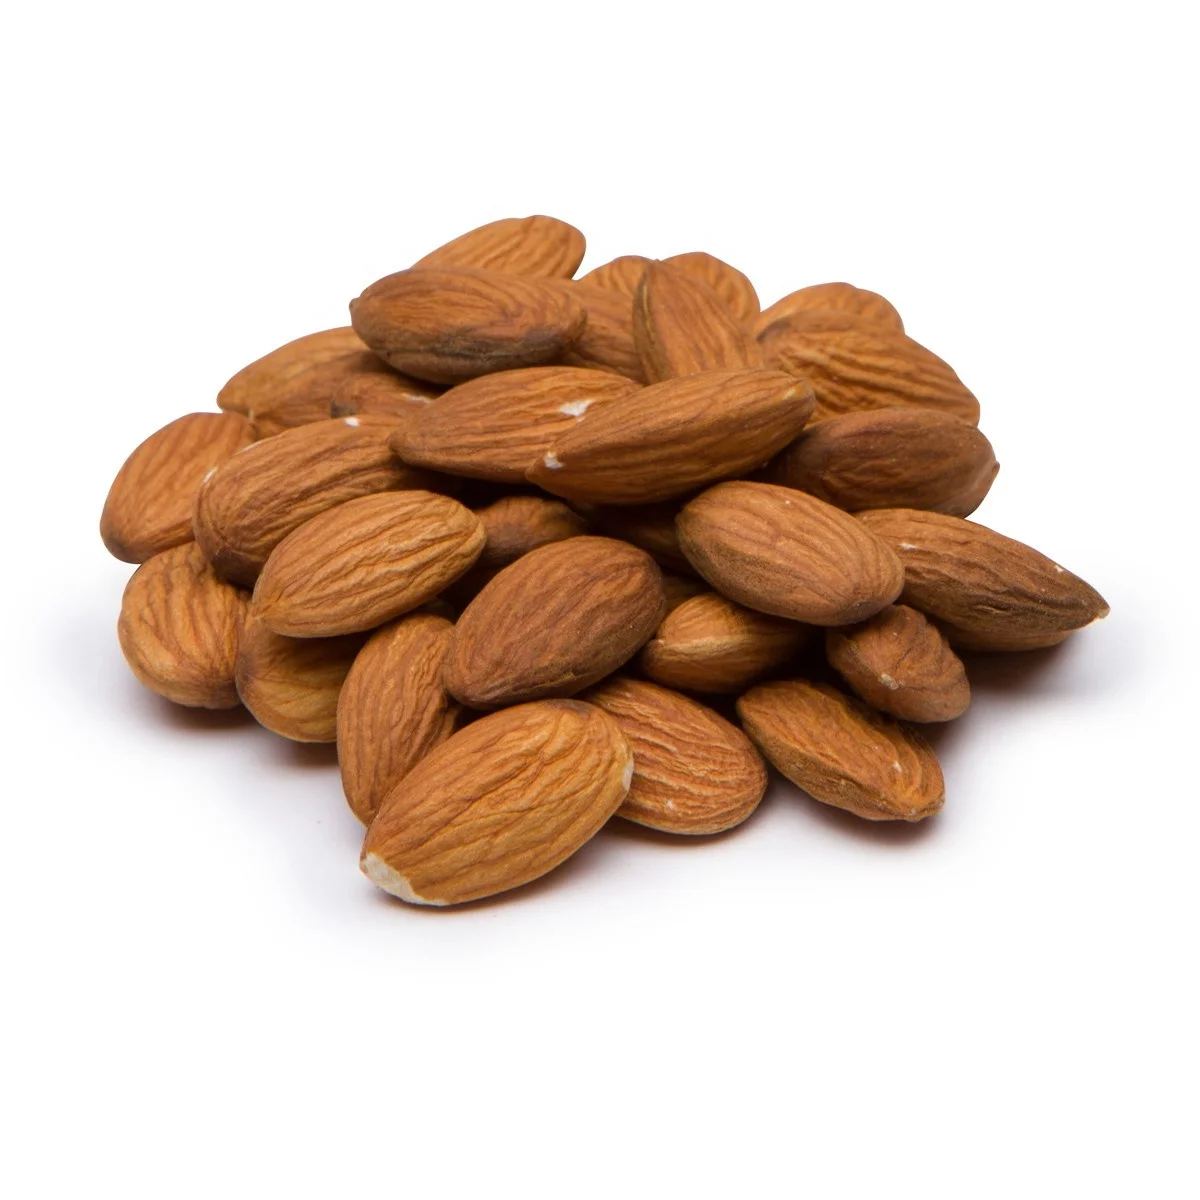 Buy Almonds - Almond Nuts - Raw Bitter and Sweet Kernels - Ships in Bulk a Grade Dried Organic Cultivation